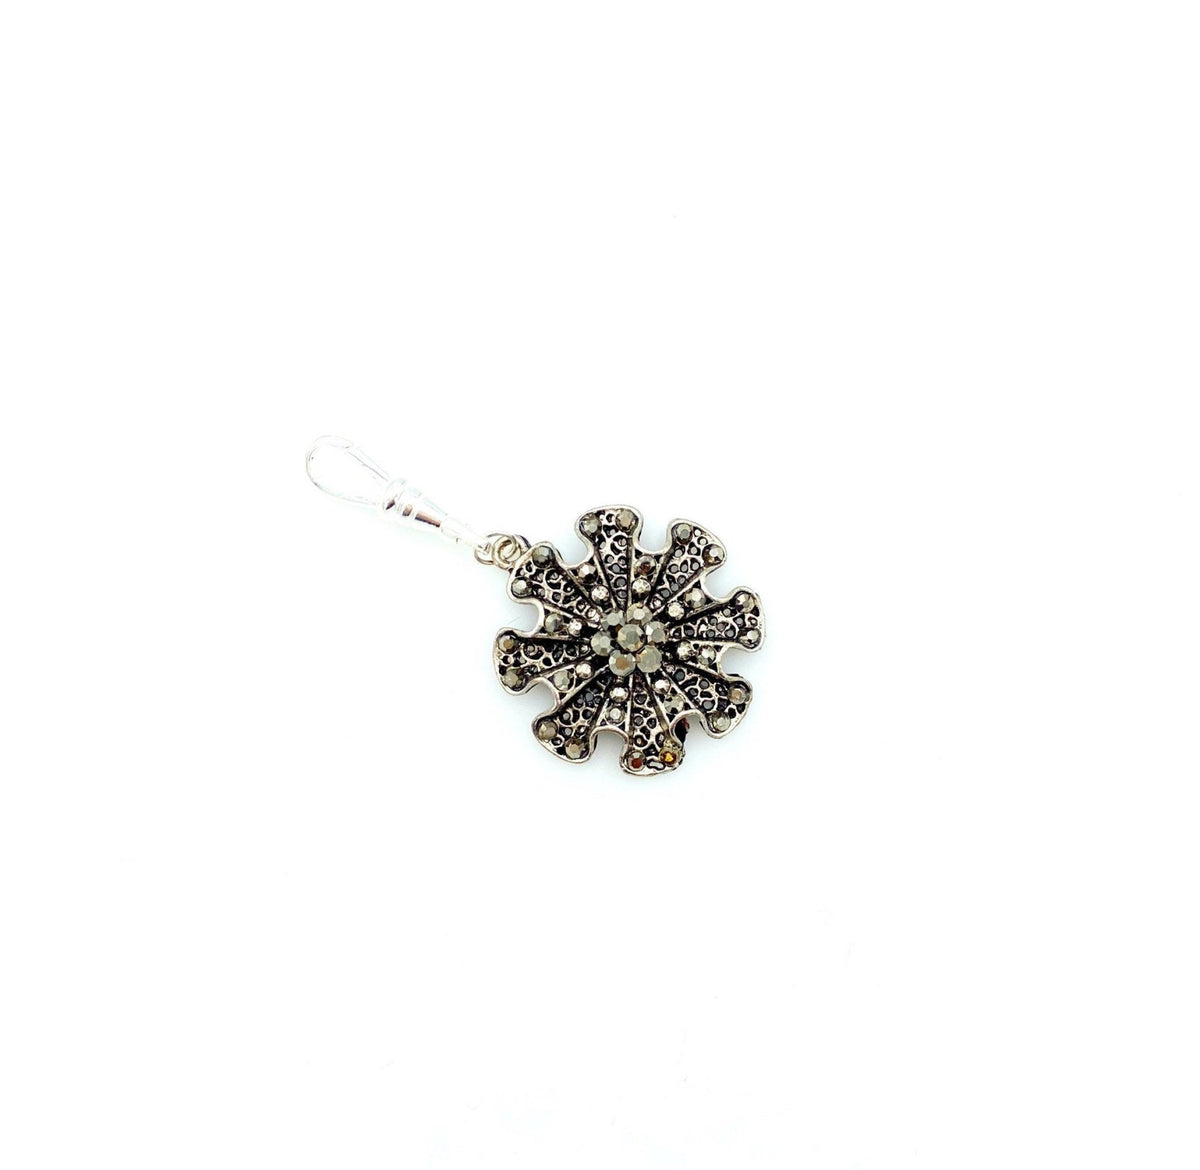 Silver Marcasite Style Flower Victorian Revival Charm - 24 Wishes Vintage Jewelry